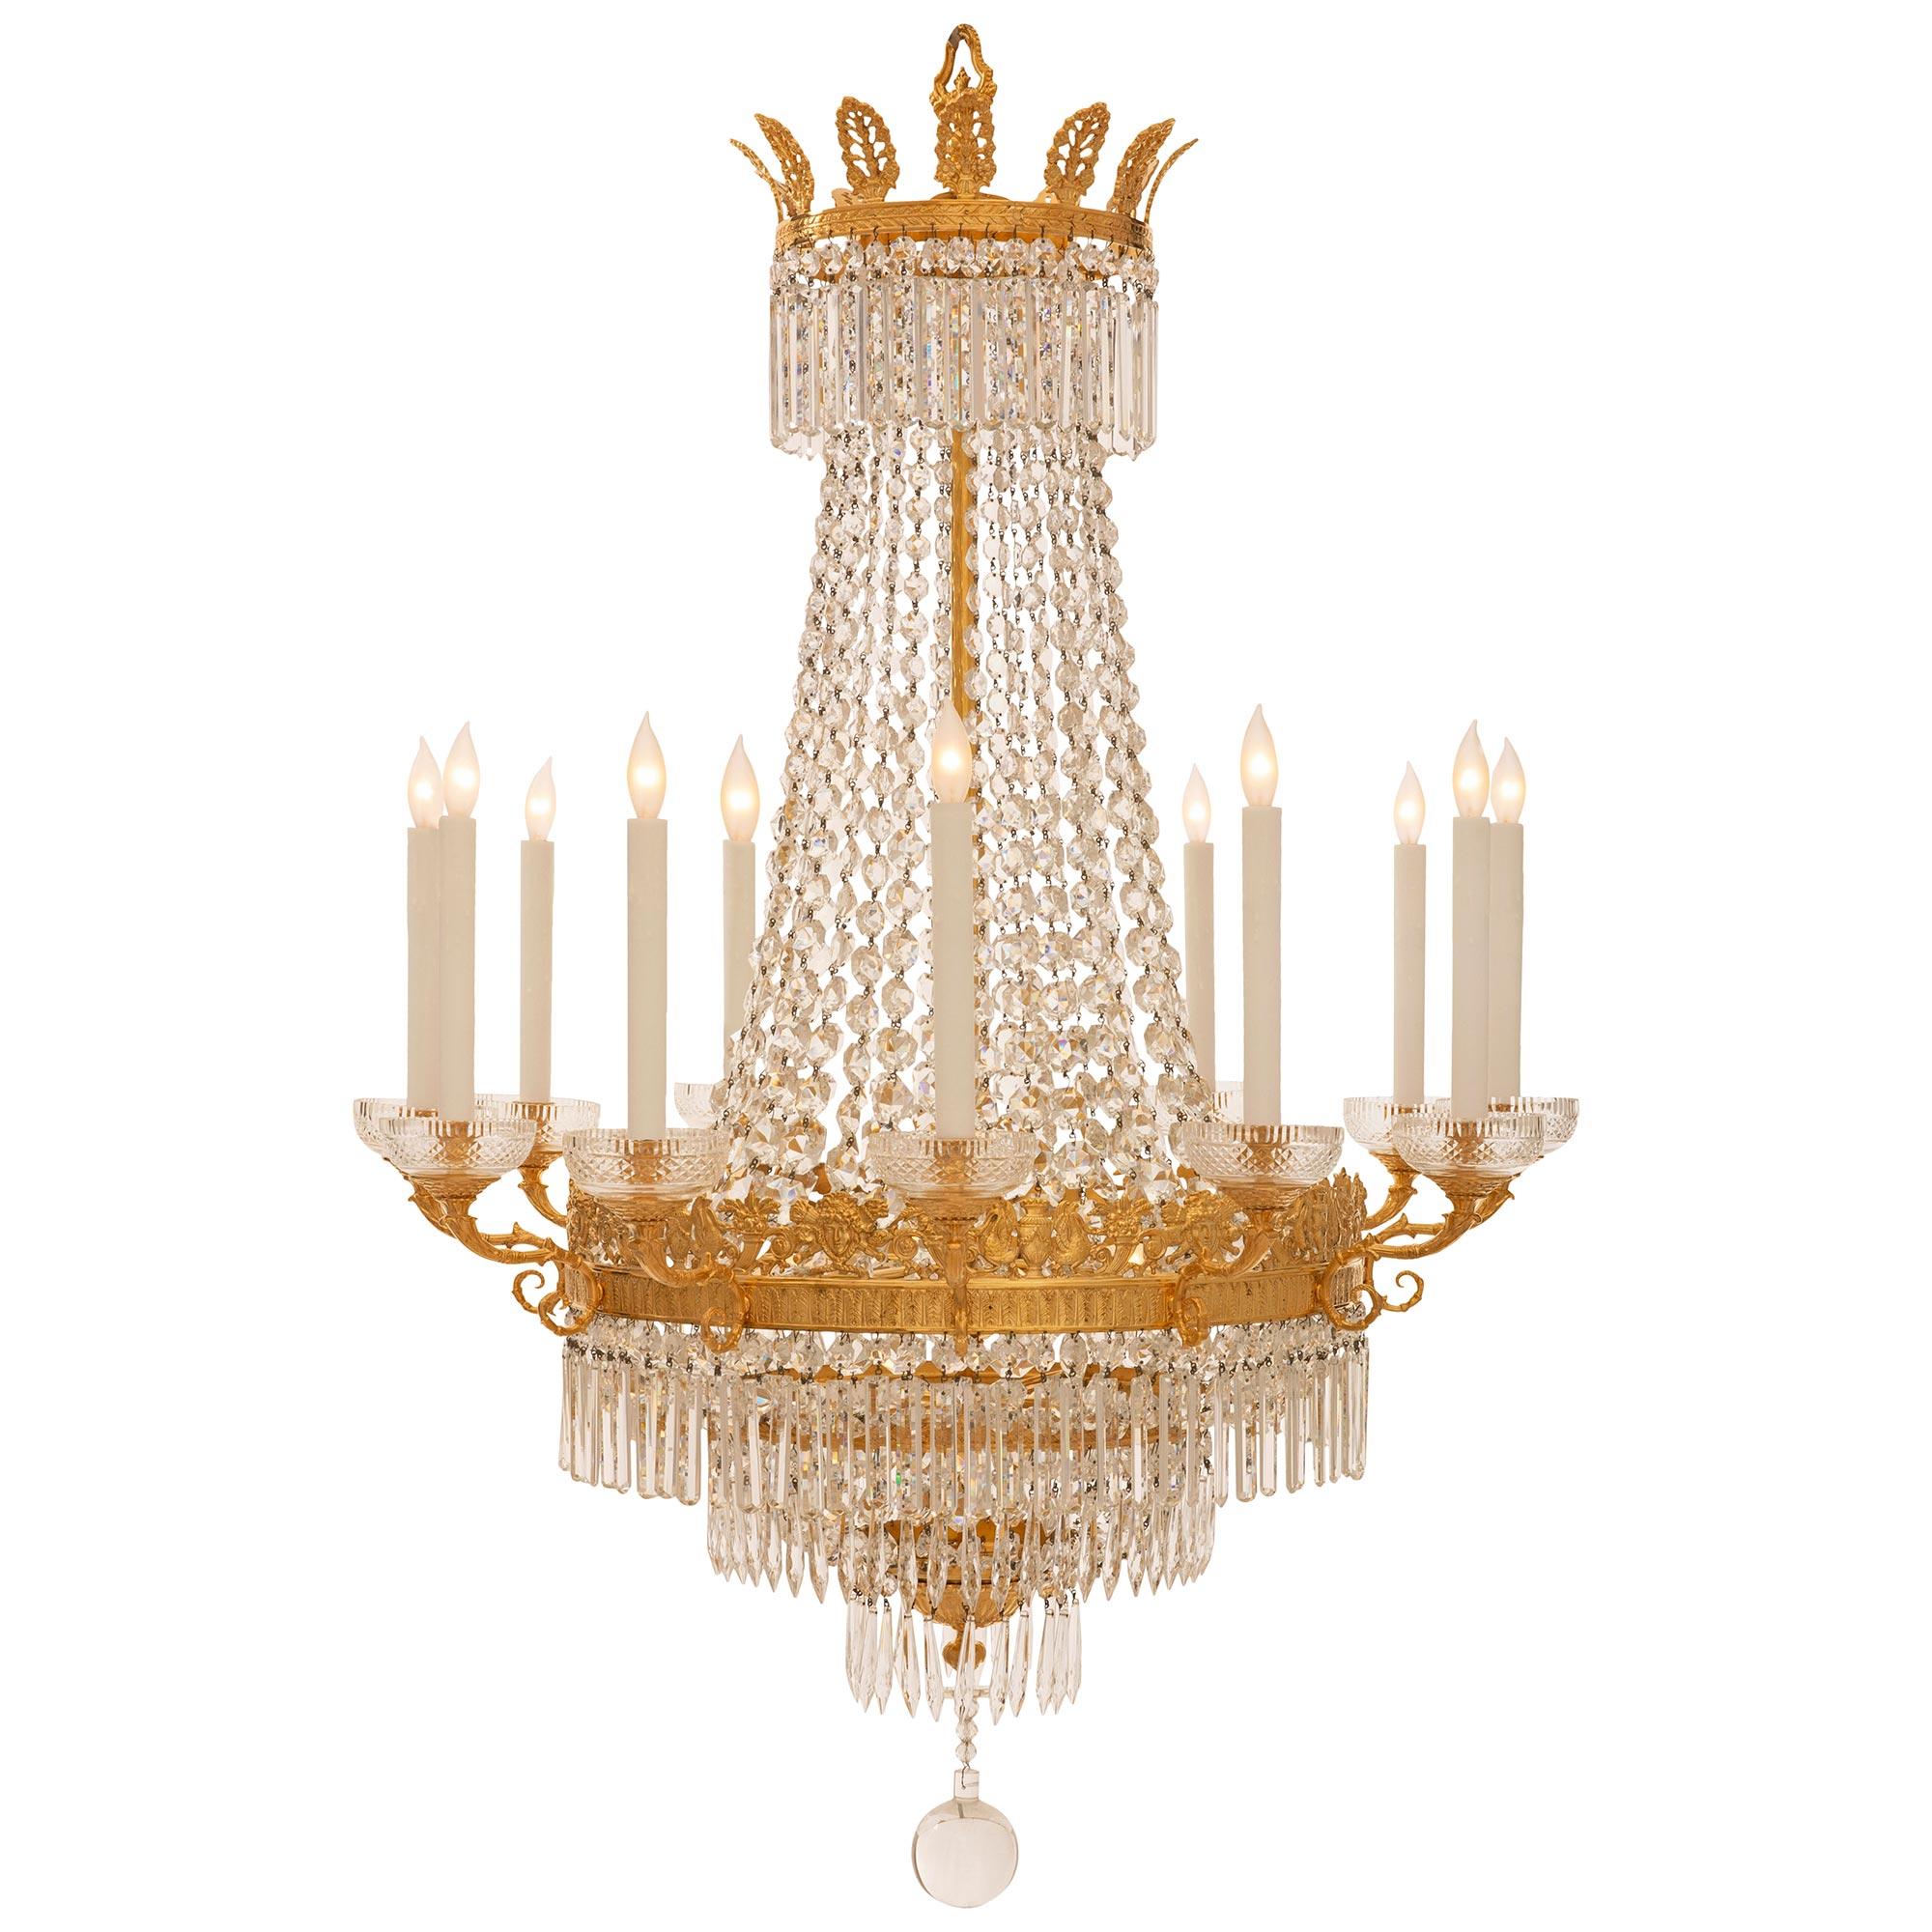 French 19th Century Empire St. Ormolu And Baccarat Crystal Chandelier In Good Condition For Sale In West Palm Beach, FL